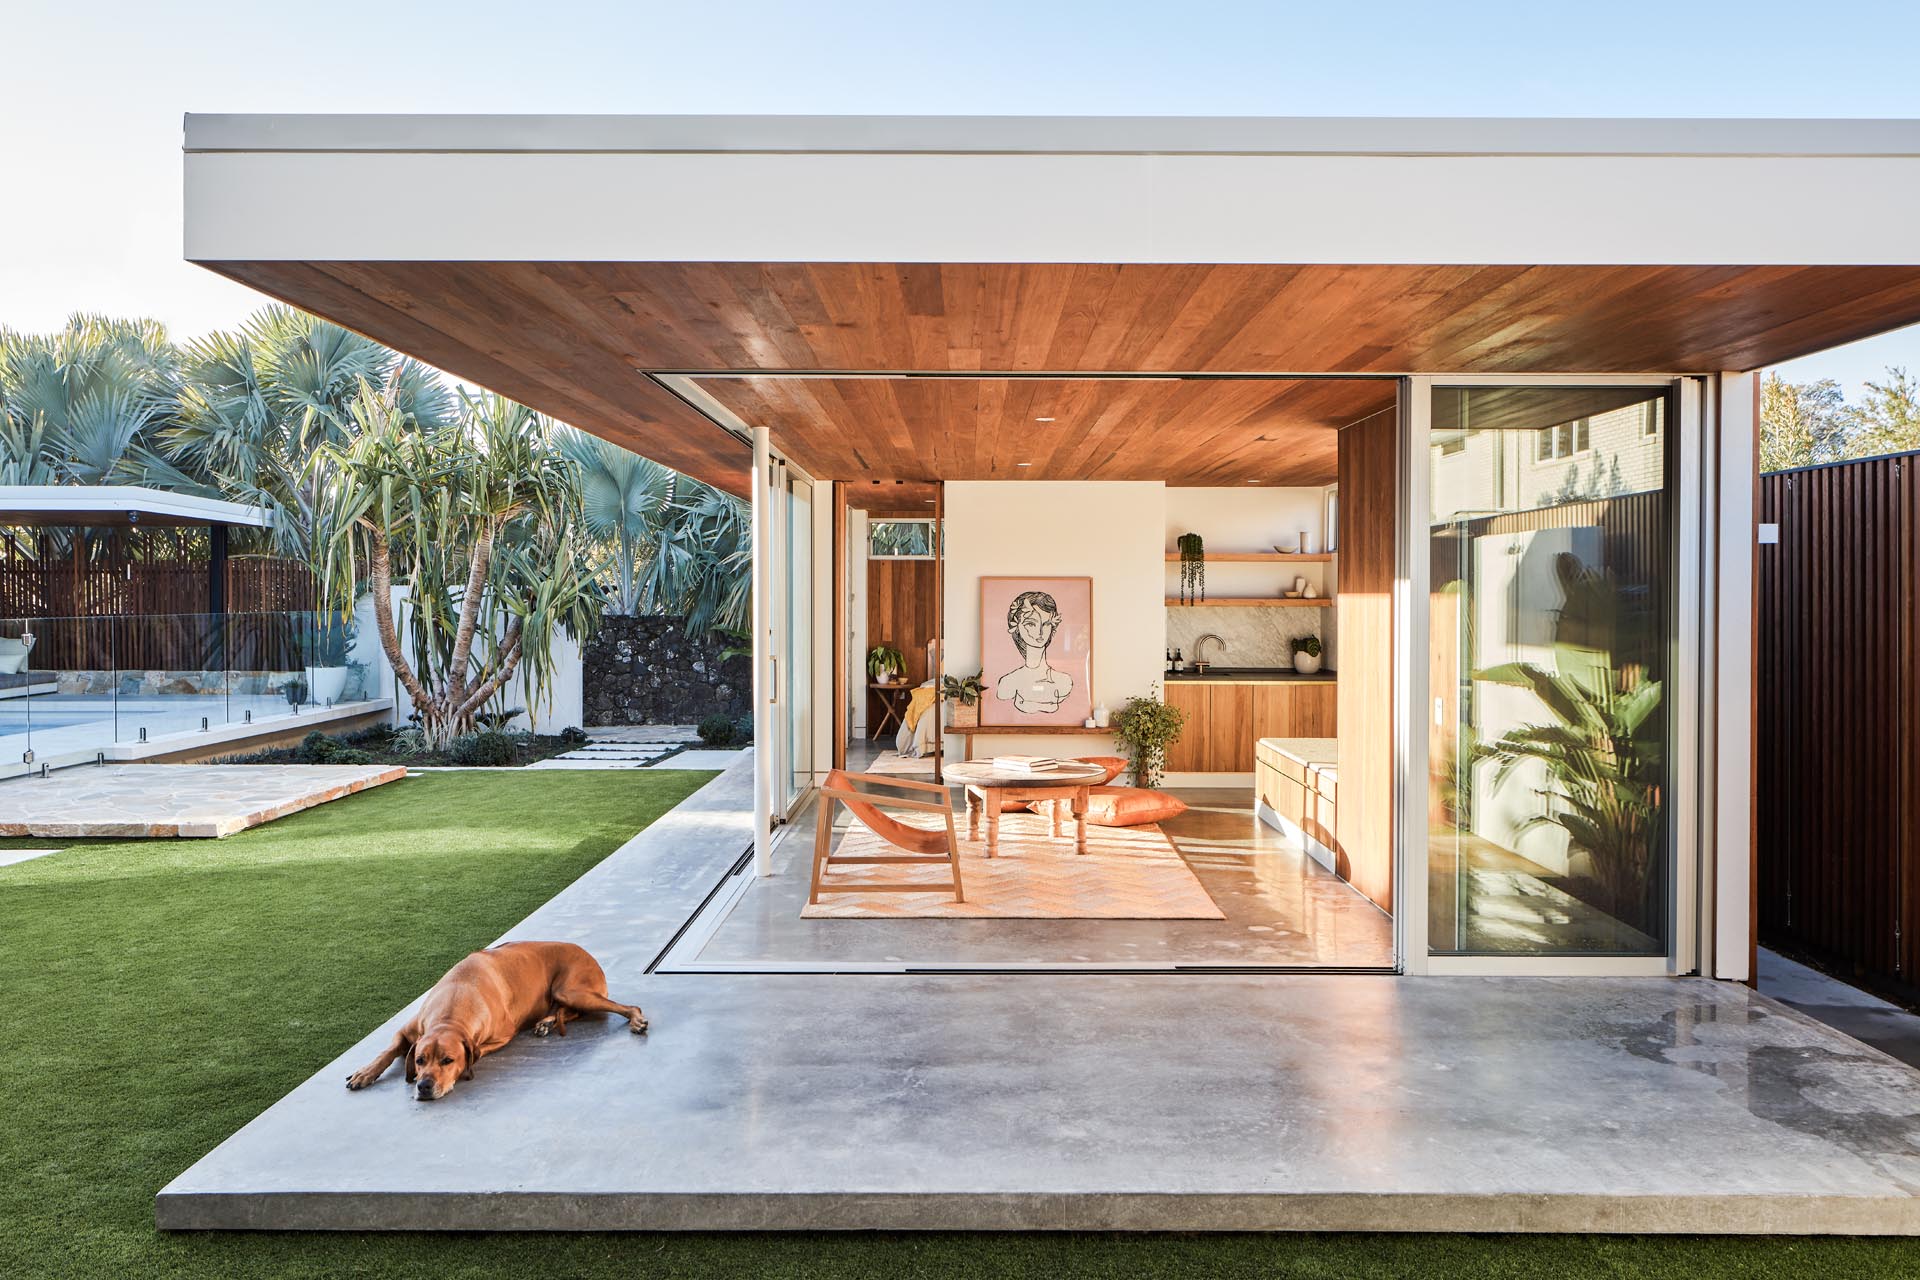 With mid-century modern influences, the sliding glass walls of this backyard studio, seamlessly open the interior spaces of the studio to the backyard. Inside, there's a wood ceiling, polished concrete floors, a small bench, storage, and a kitchenette.